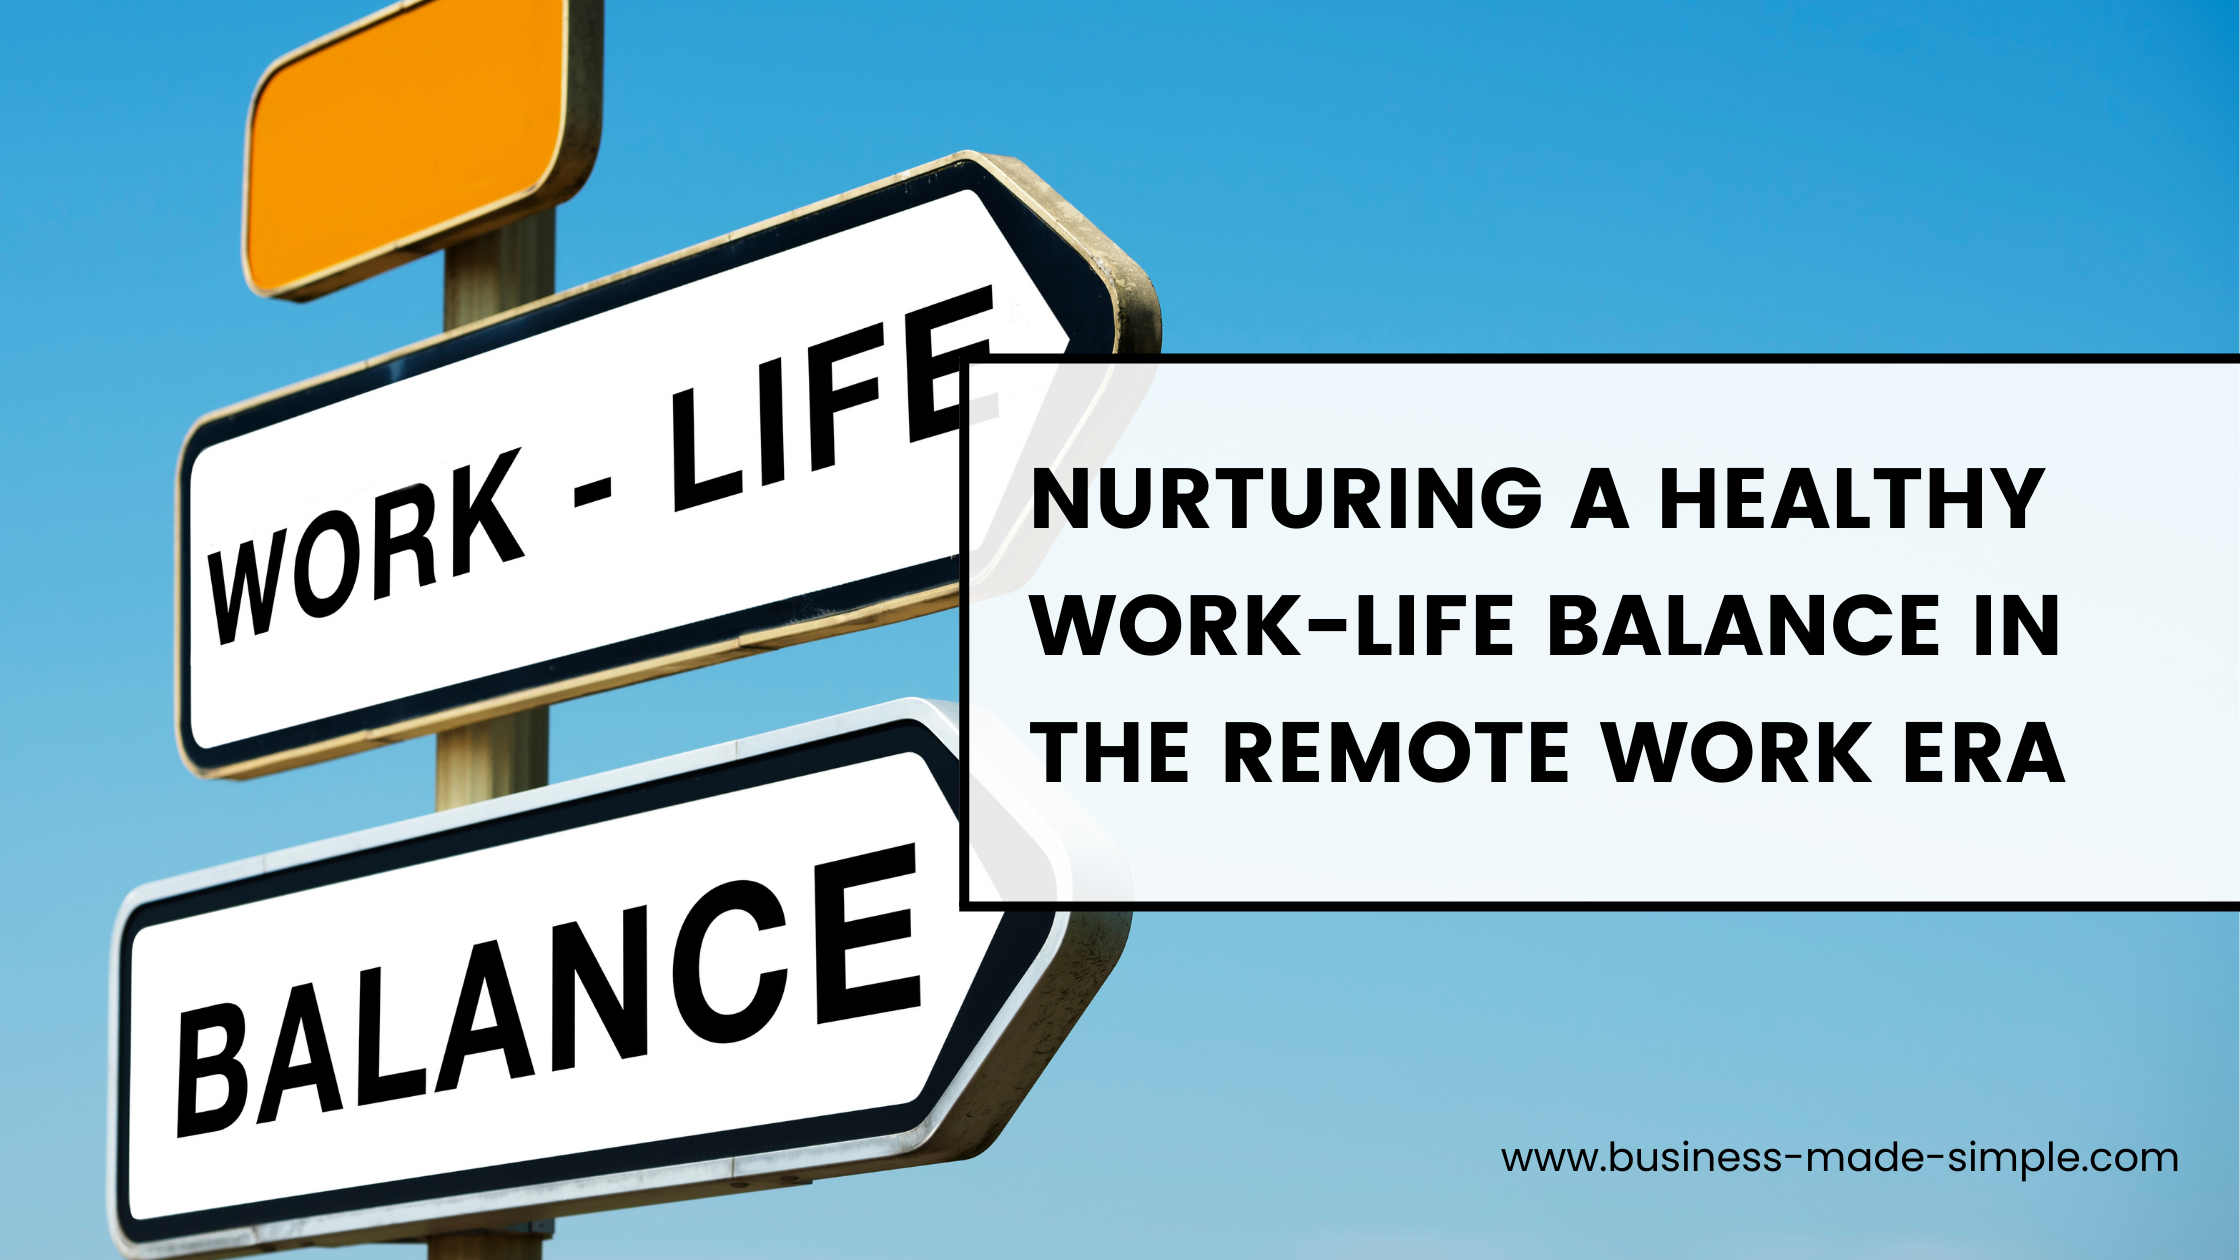 Remote work-life balance Remote work boundaries Effective time management Personal well-being Remote work strategies Remote work productivity Work-life integration Remote work tips Remote work challenges Remote work success Time management techniques Work-life harmony Remote work wellness Remote work self-care Remote work priorities